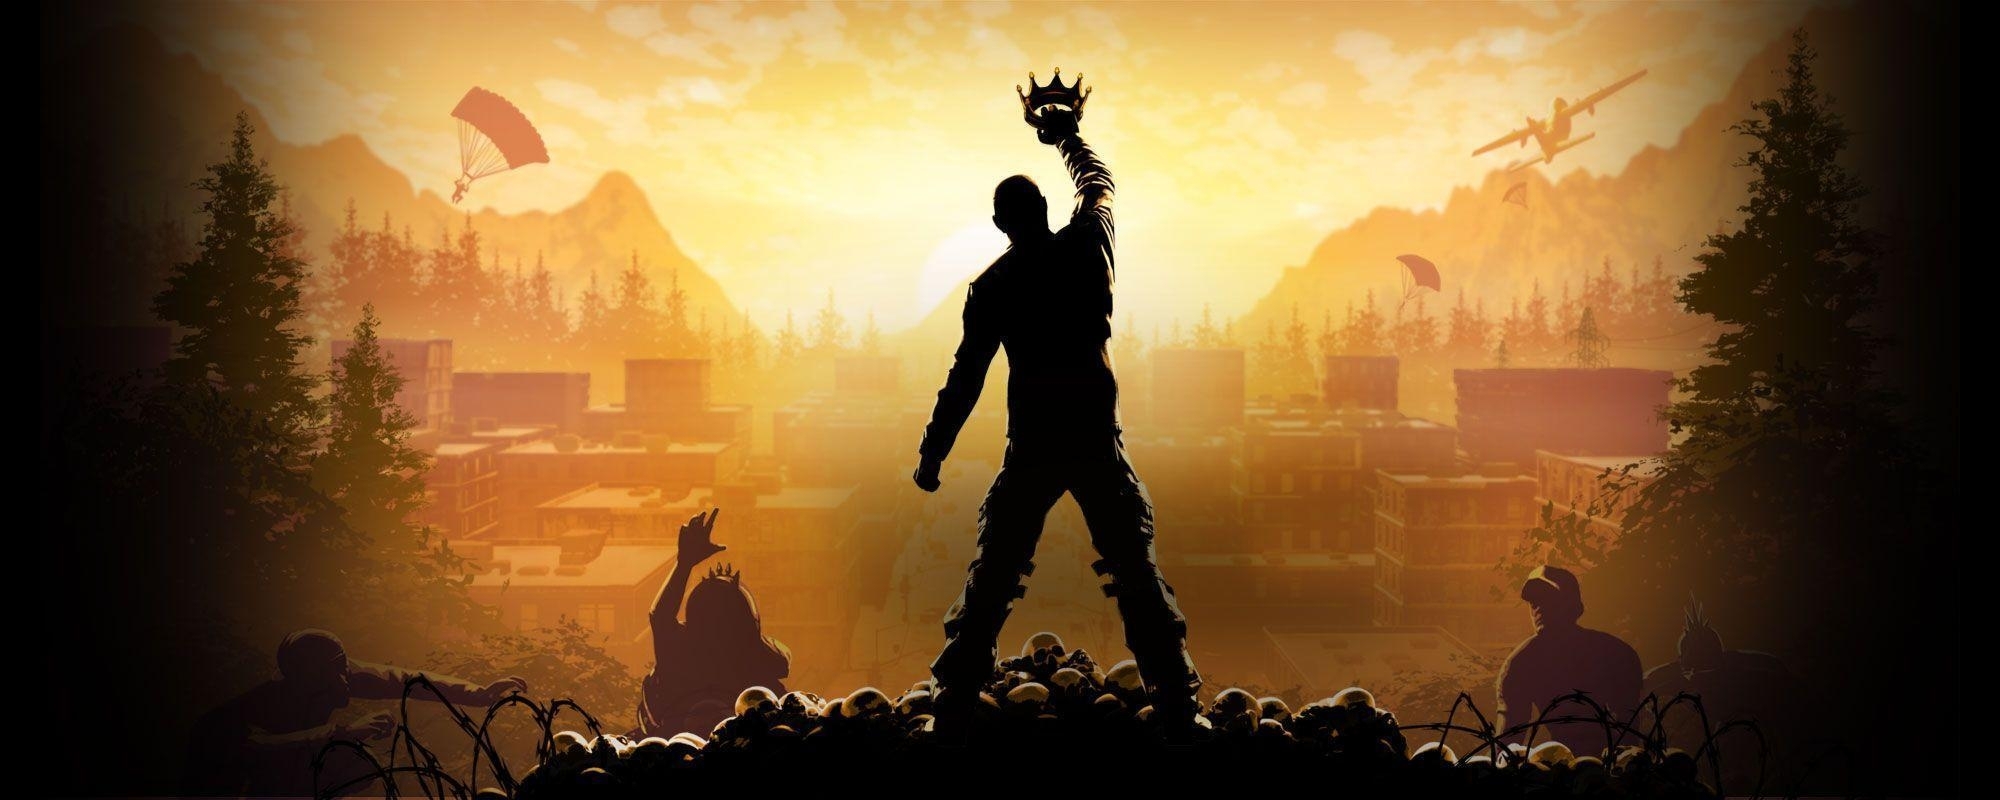 h1z1: king of the kill wallpapers - wallpaper cave